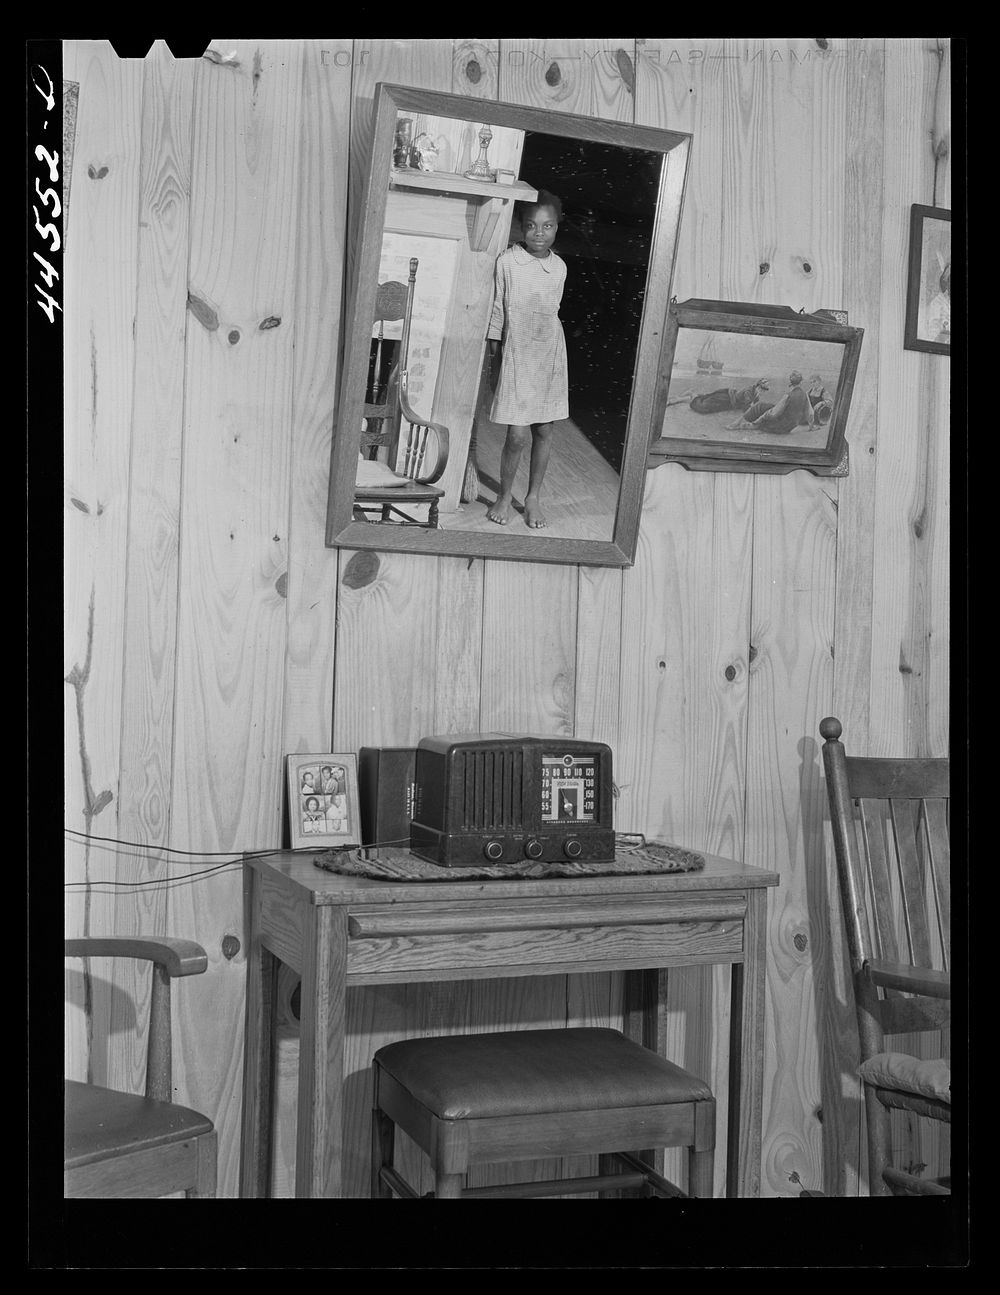 FSA (Farm Security Administration) furniture in the home of tenant purchase client Robert McWhorter. Woodville, Greene…